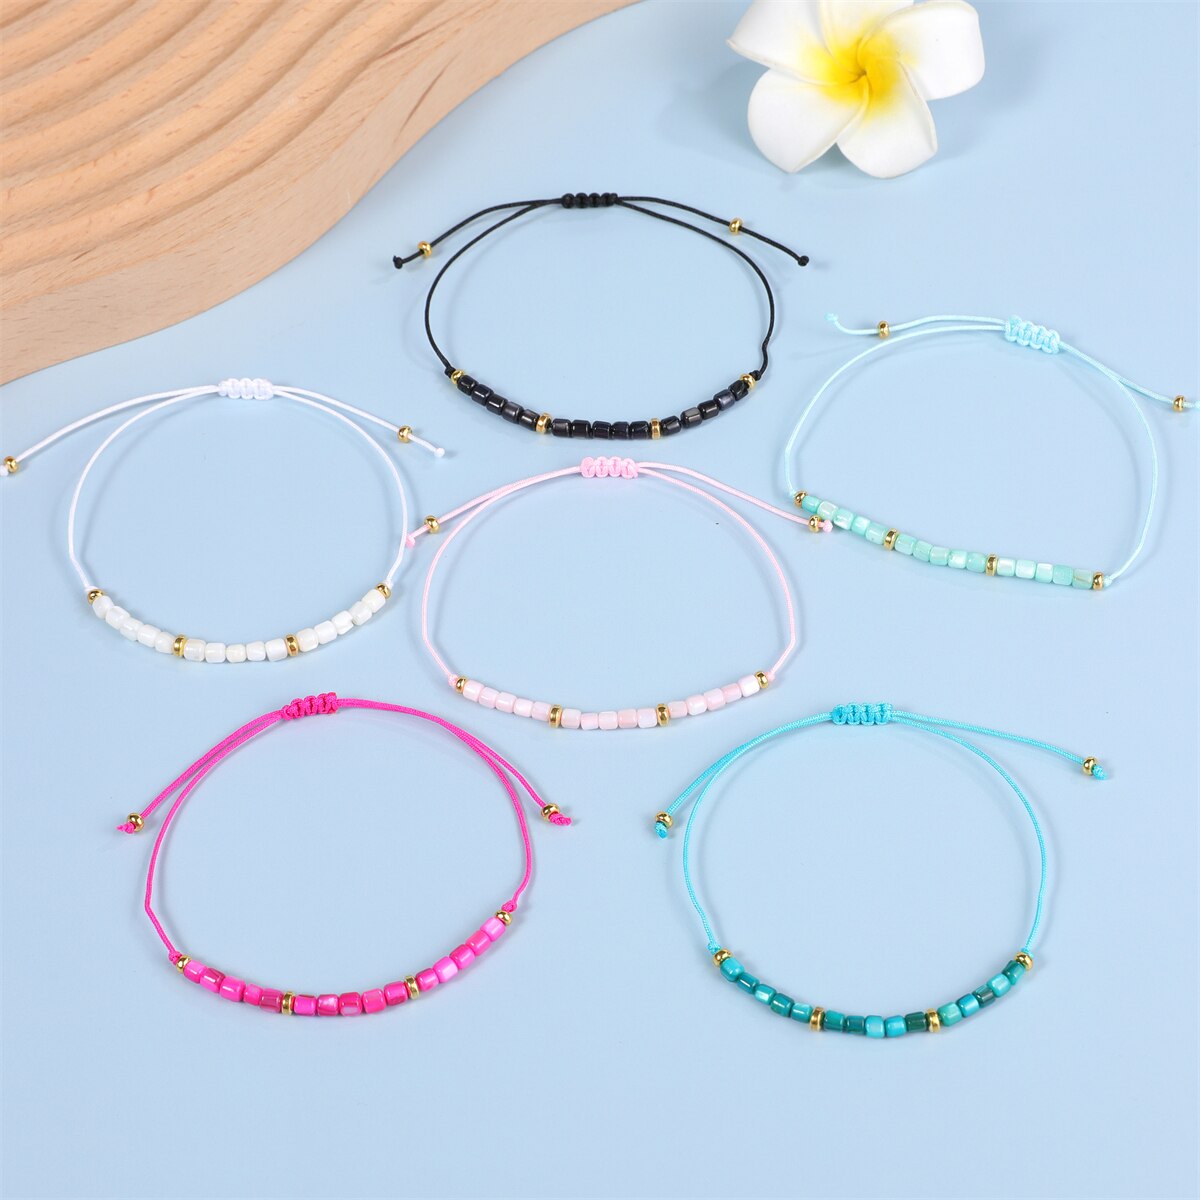 12pcs Cylindrical Shell Beaded Braided Bracelet Set for Women Crystal Bead Chain Anklet Jewelry Gifts Wholesale